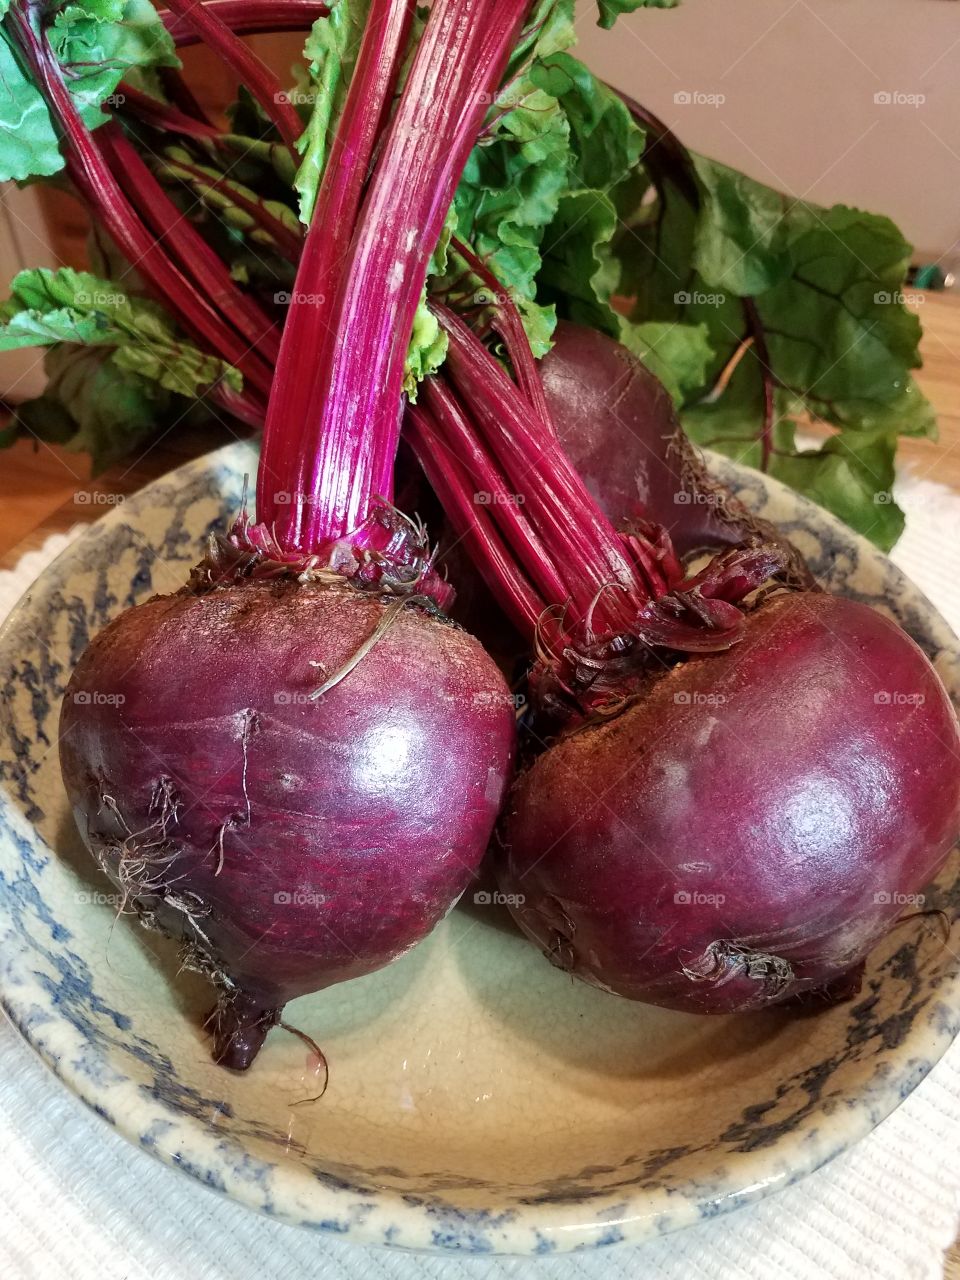 Beetroot with leaf on plate